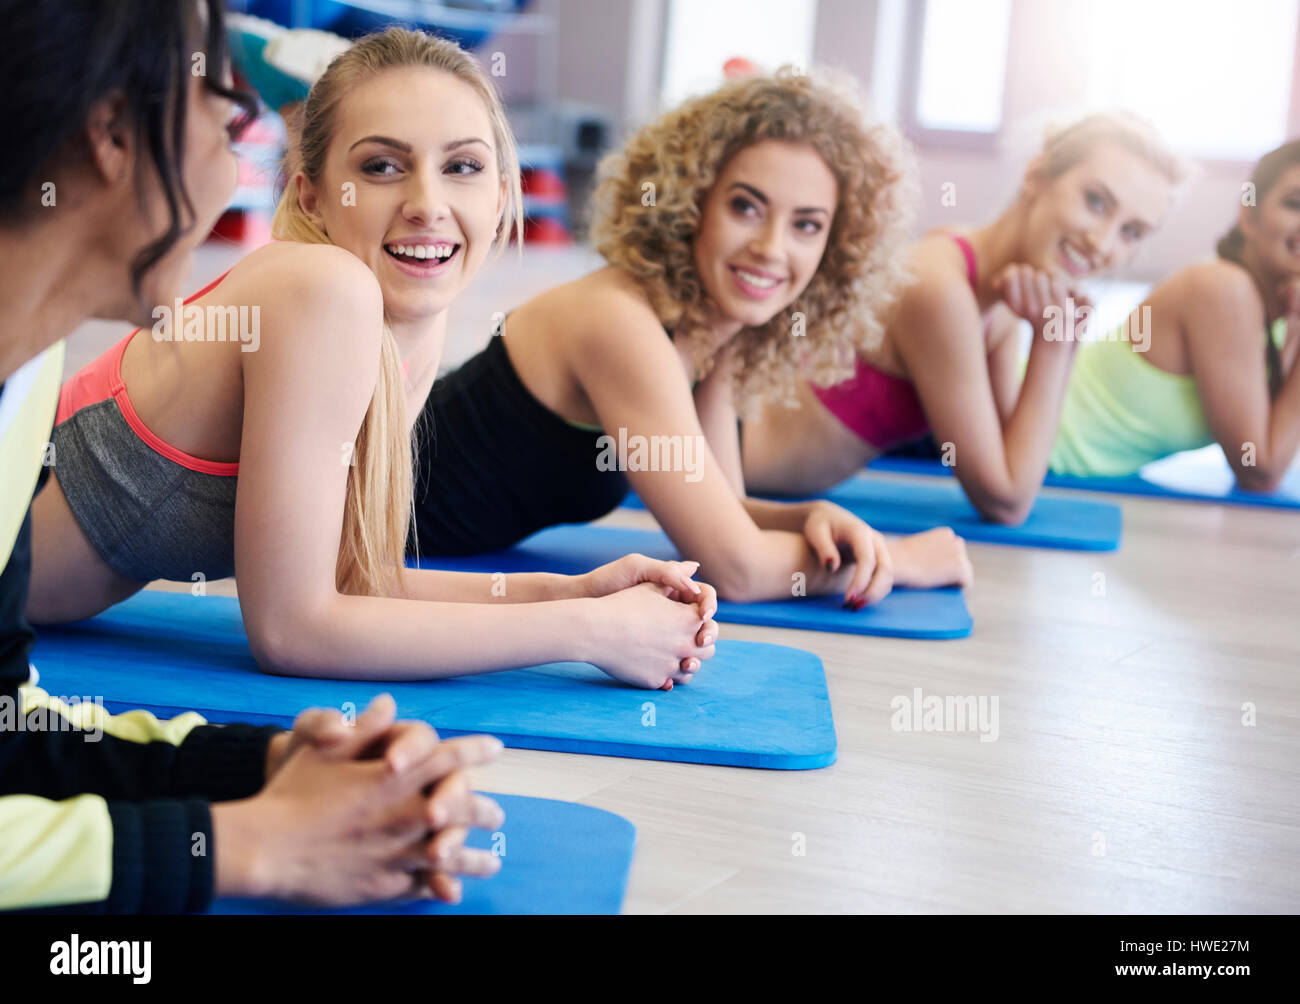 Quick break over gym class session Stock Photo